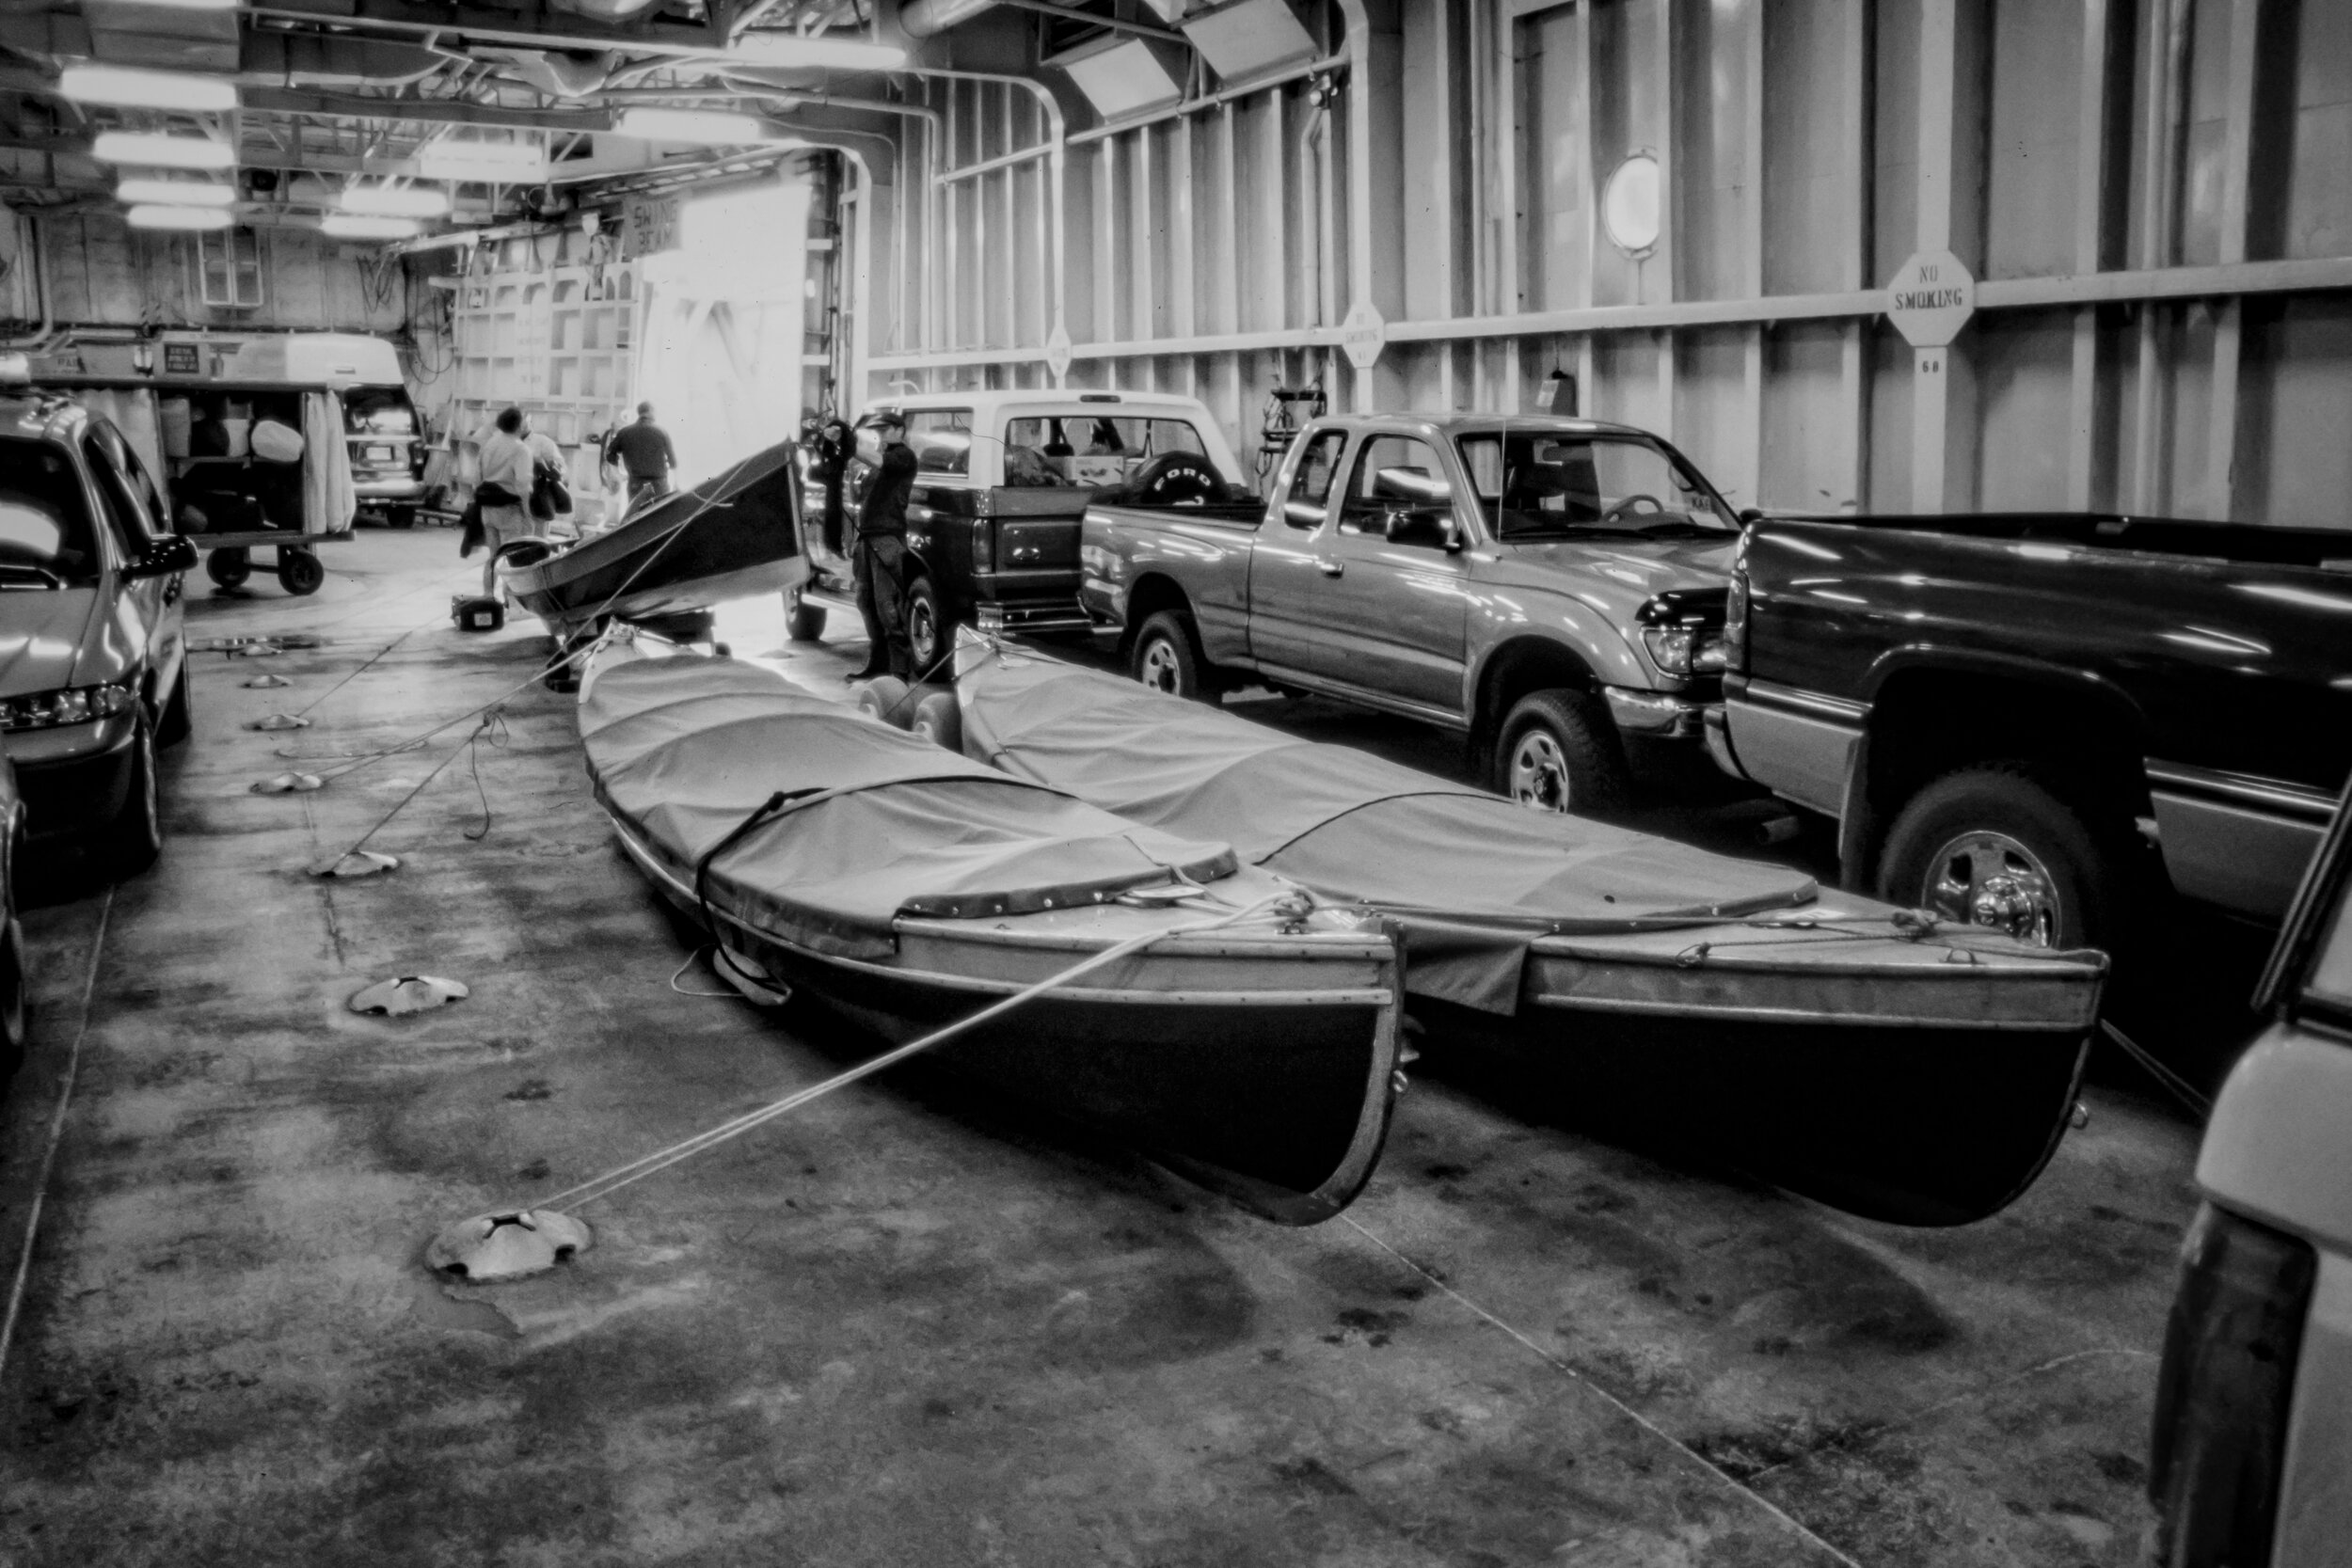  We secured the boats inside the ferry’s vehicle deck. 